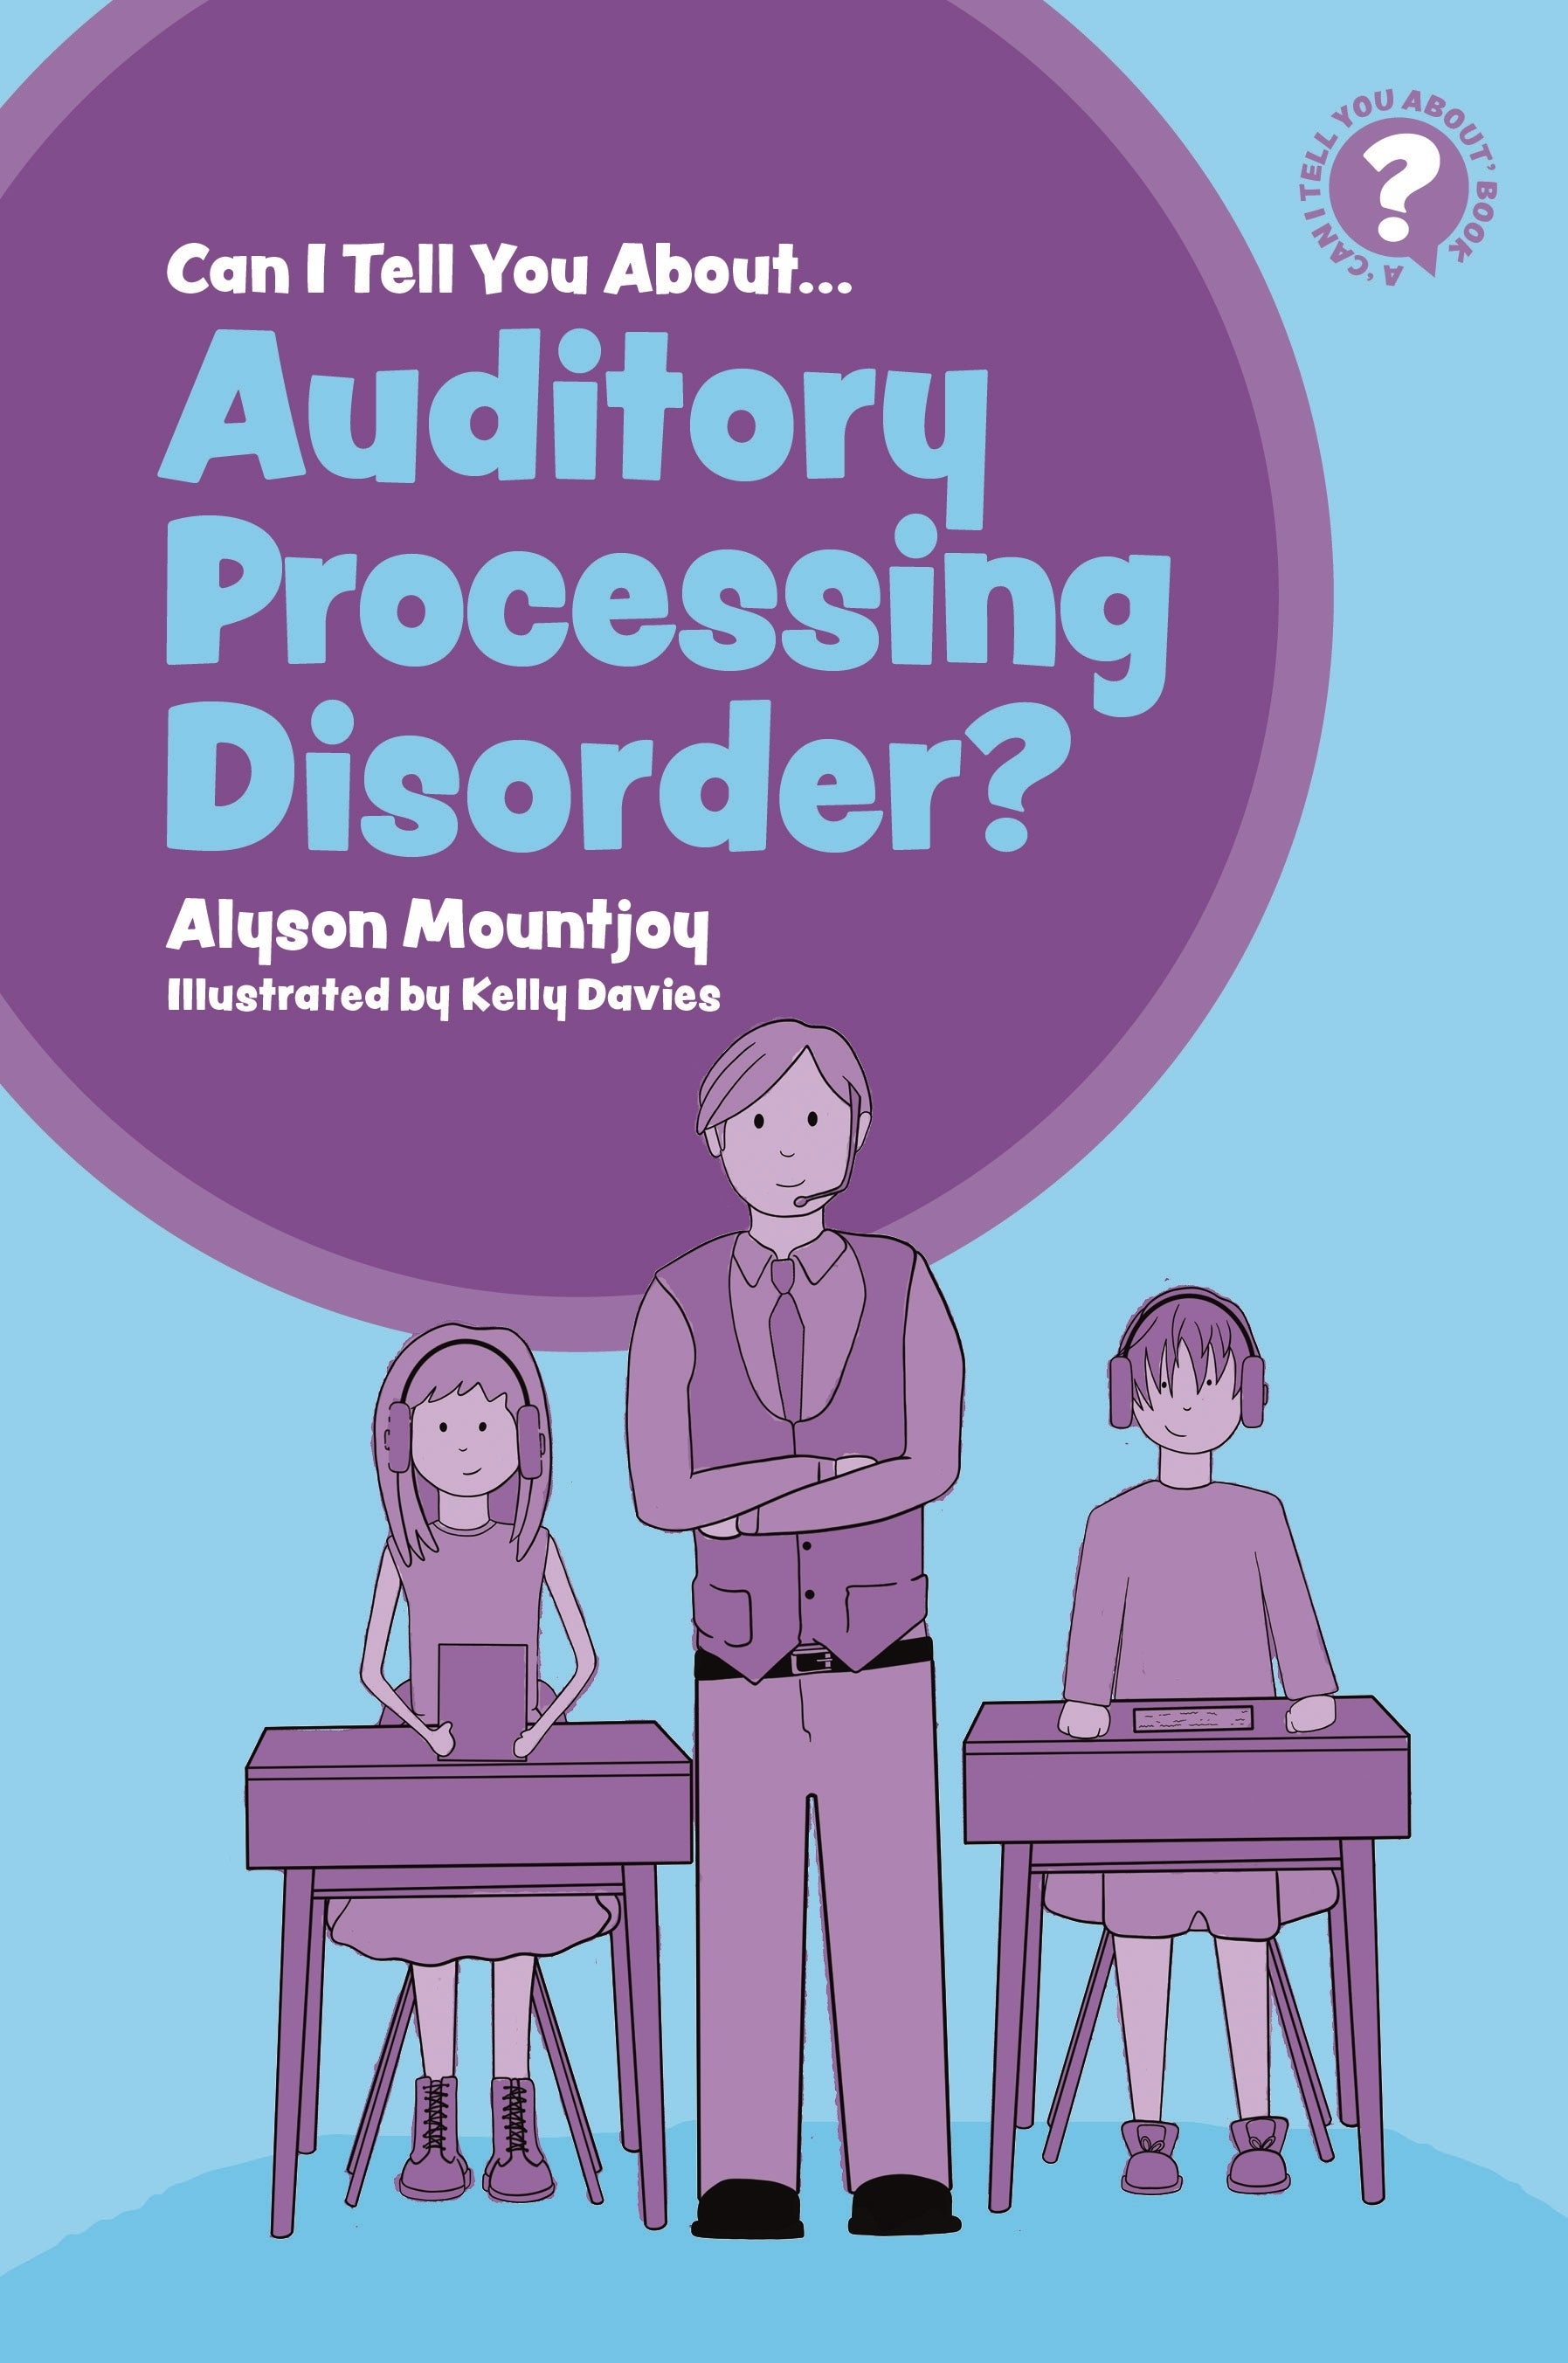 Can I tell you about Auditory Processing Disorder? by Alyson Mountjoy, Kelly Davies